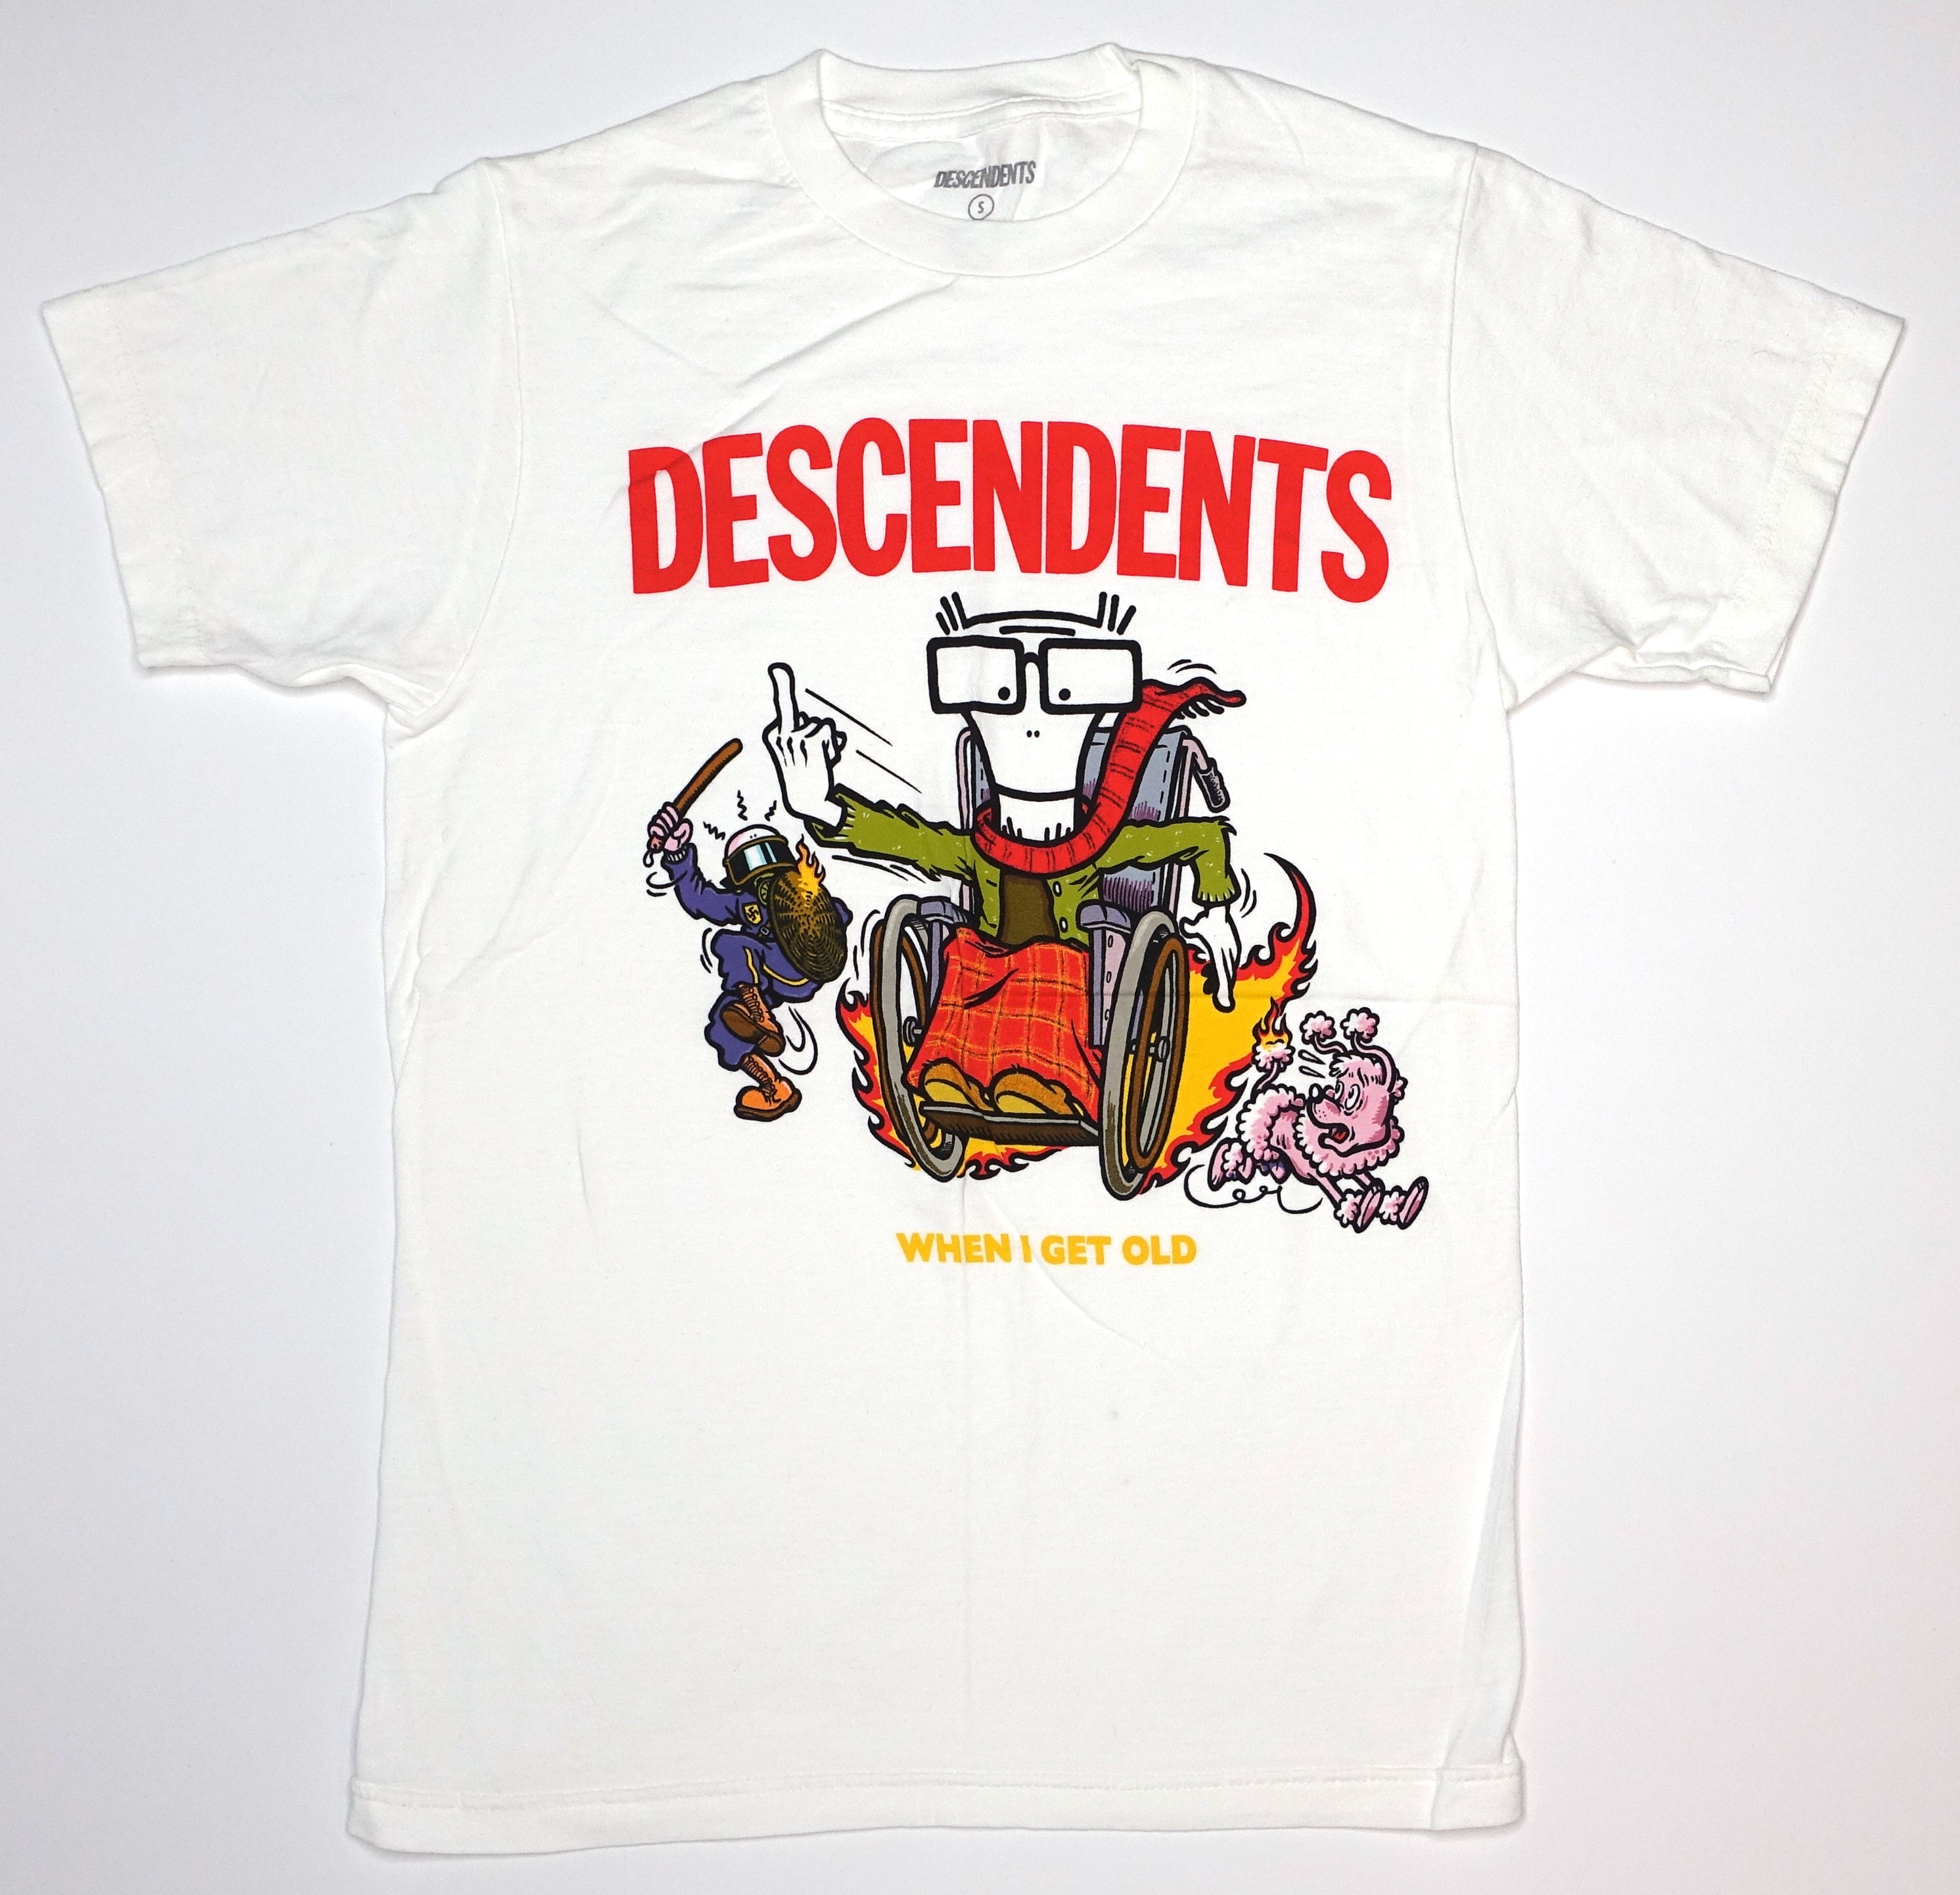 Descendents - When I Get Old Mail-Order Shirt Size Small